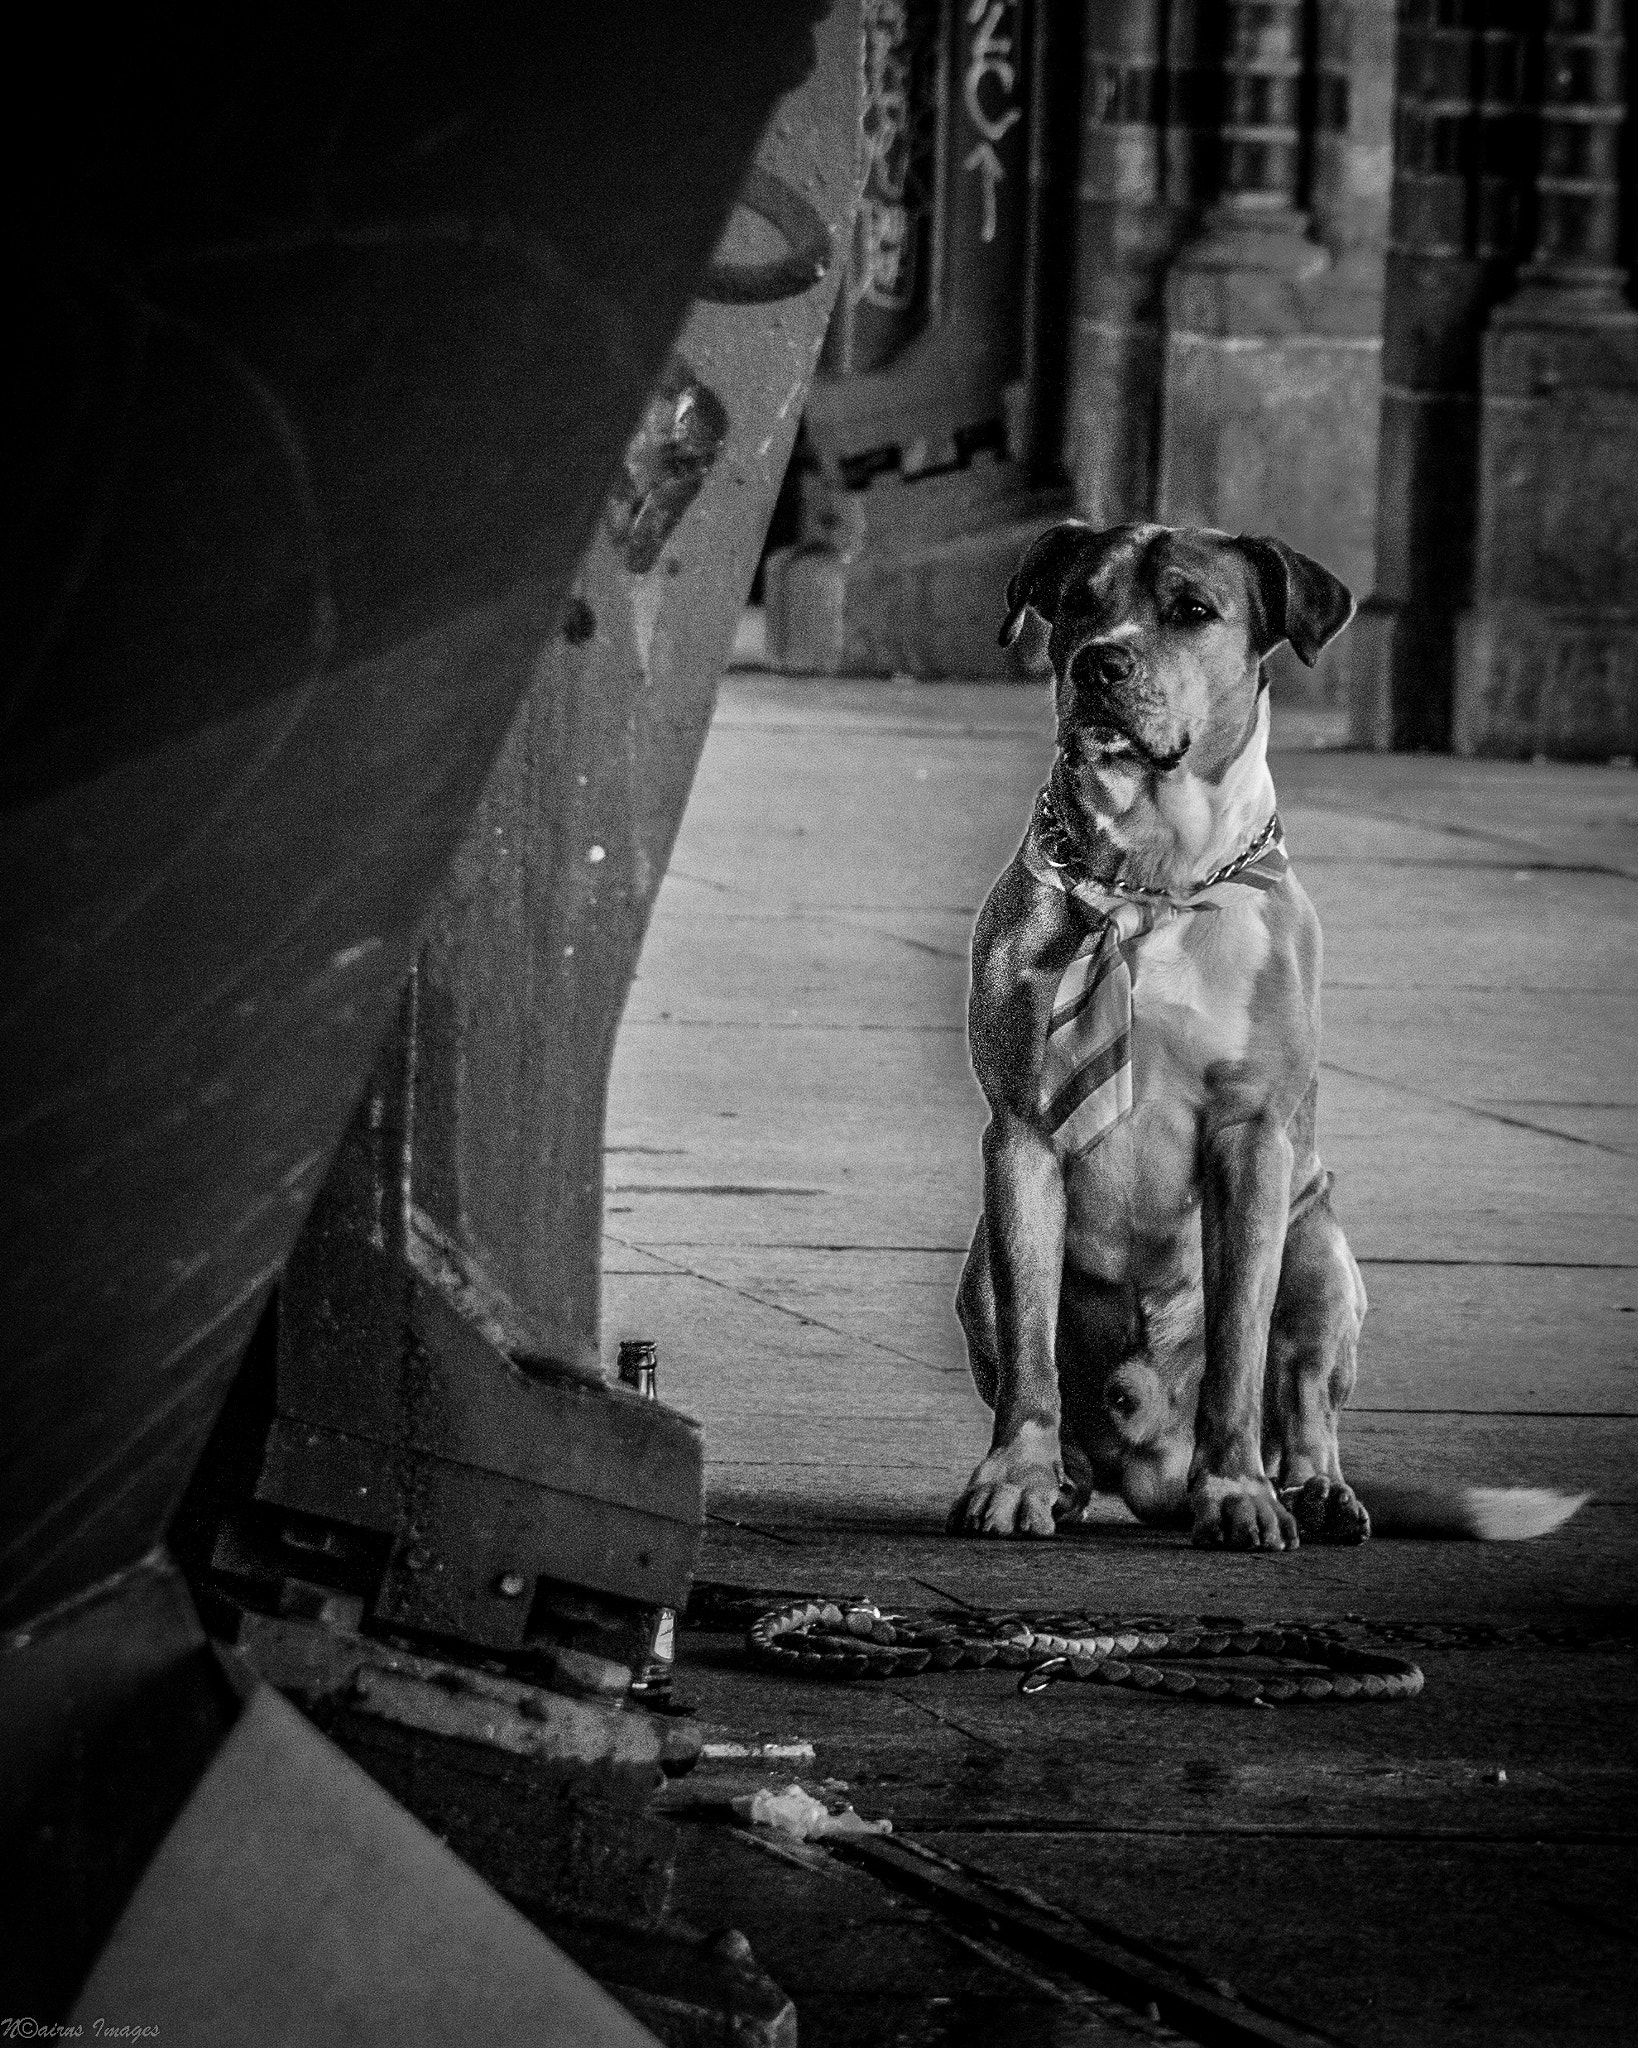 Olympus E-600 (EVOLT E-600) sample photo. A street dog wearing a tie photography